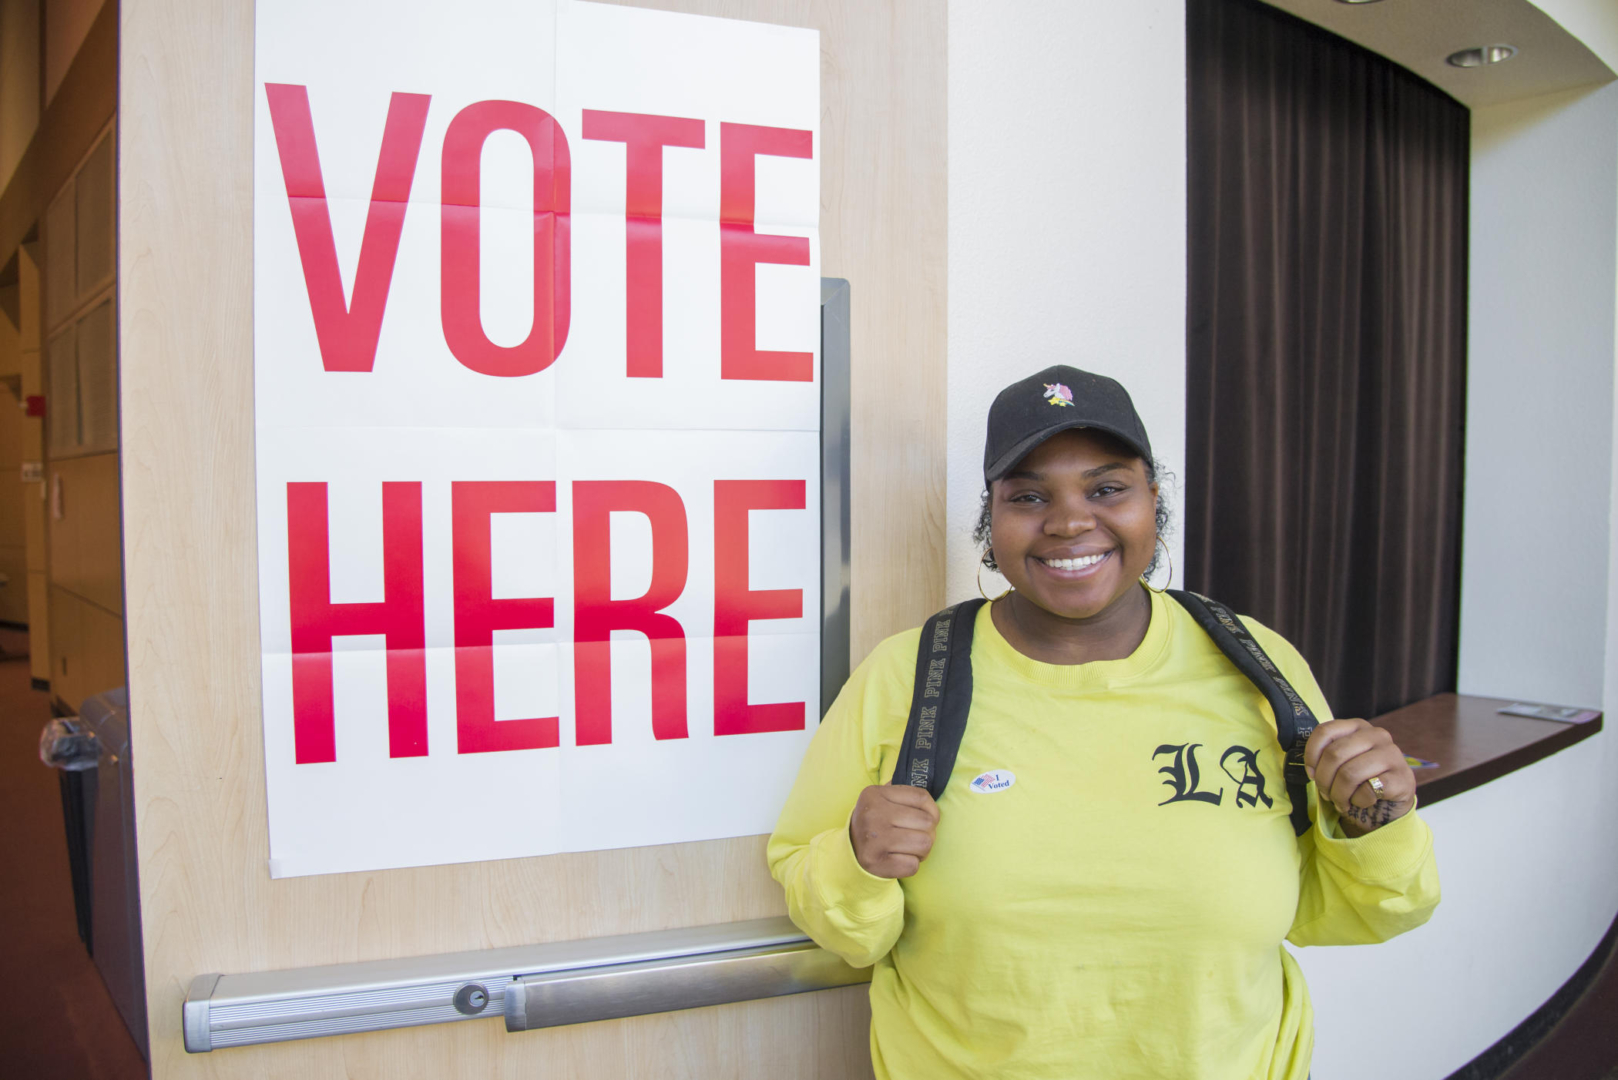 A student stands next to a "vote here" sign while wearing an "I voted" sticker.